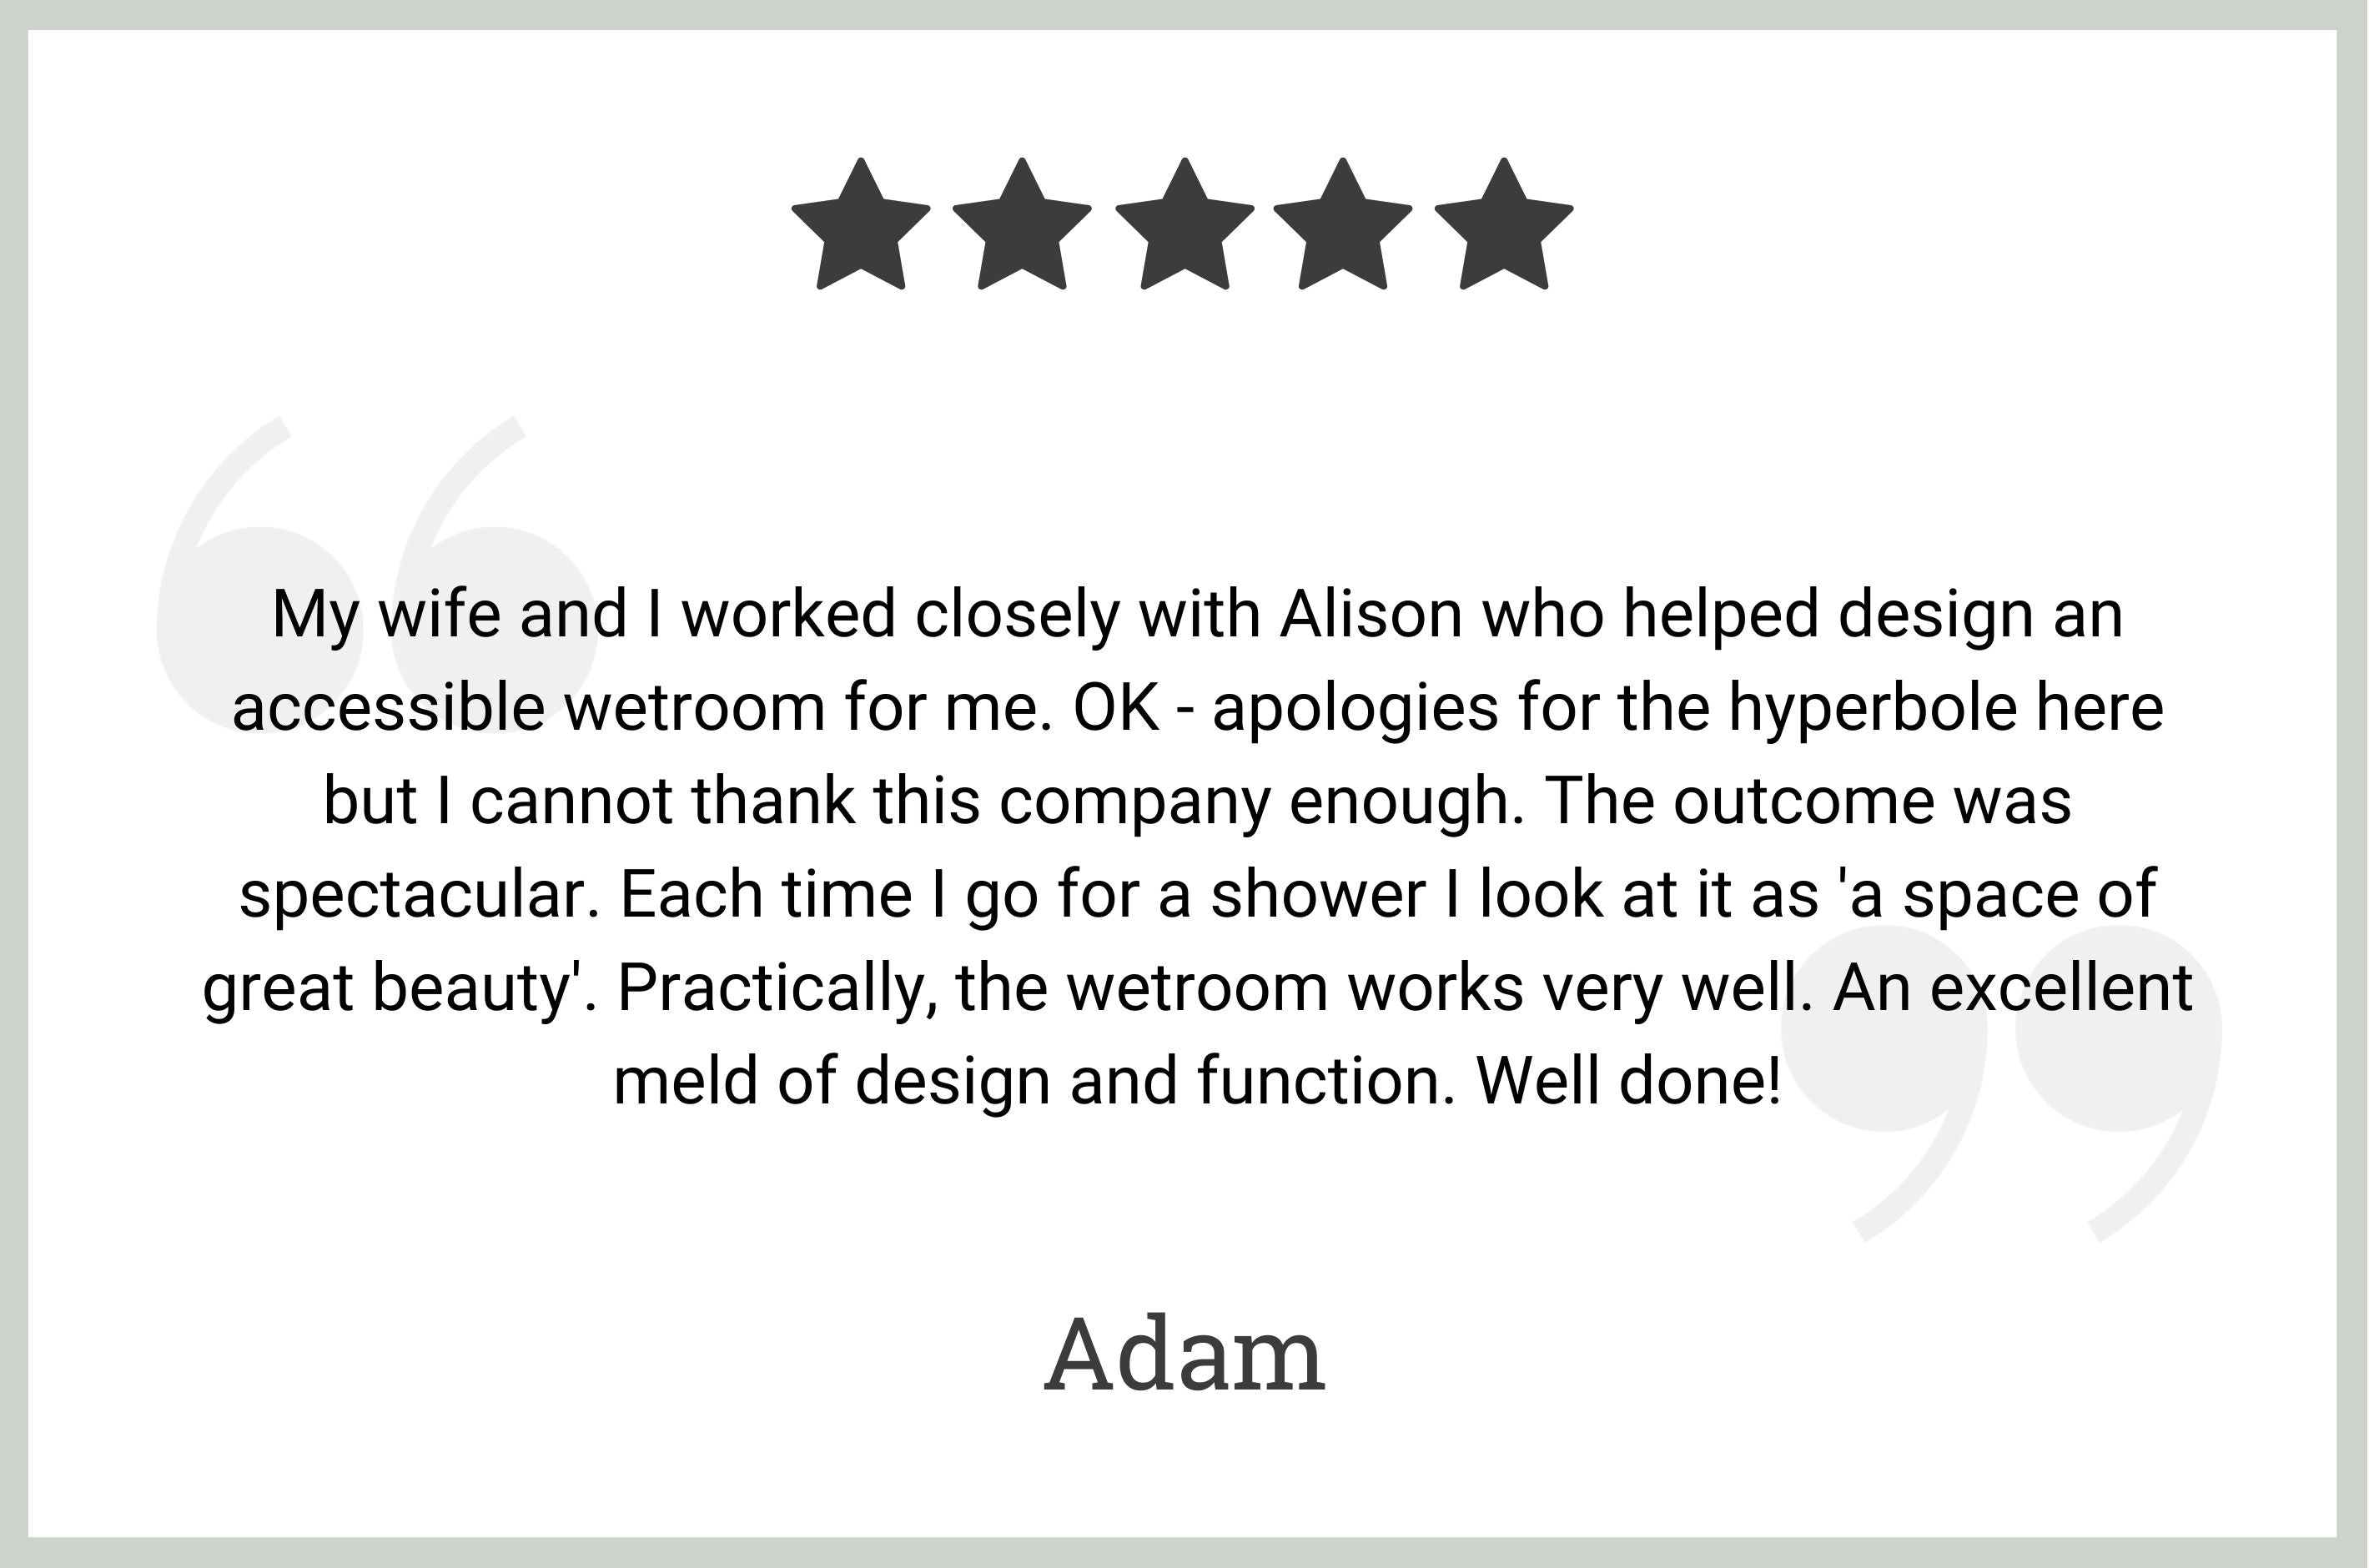 5 star review by Adam